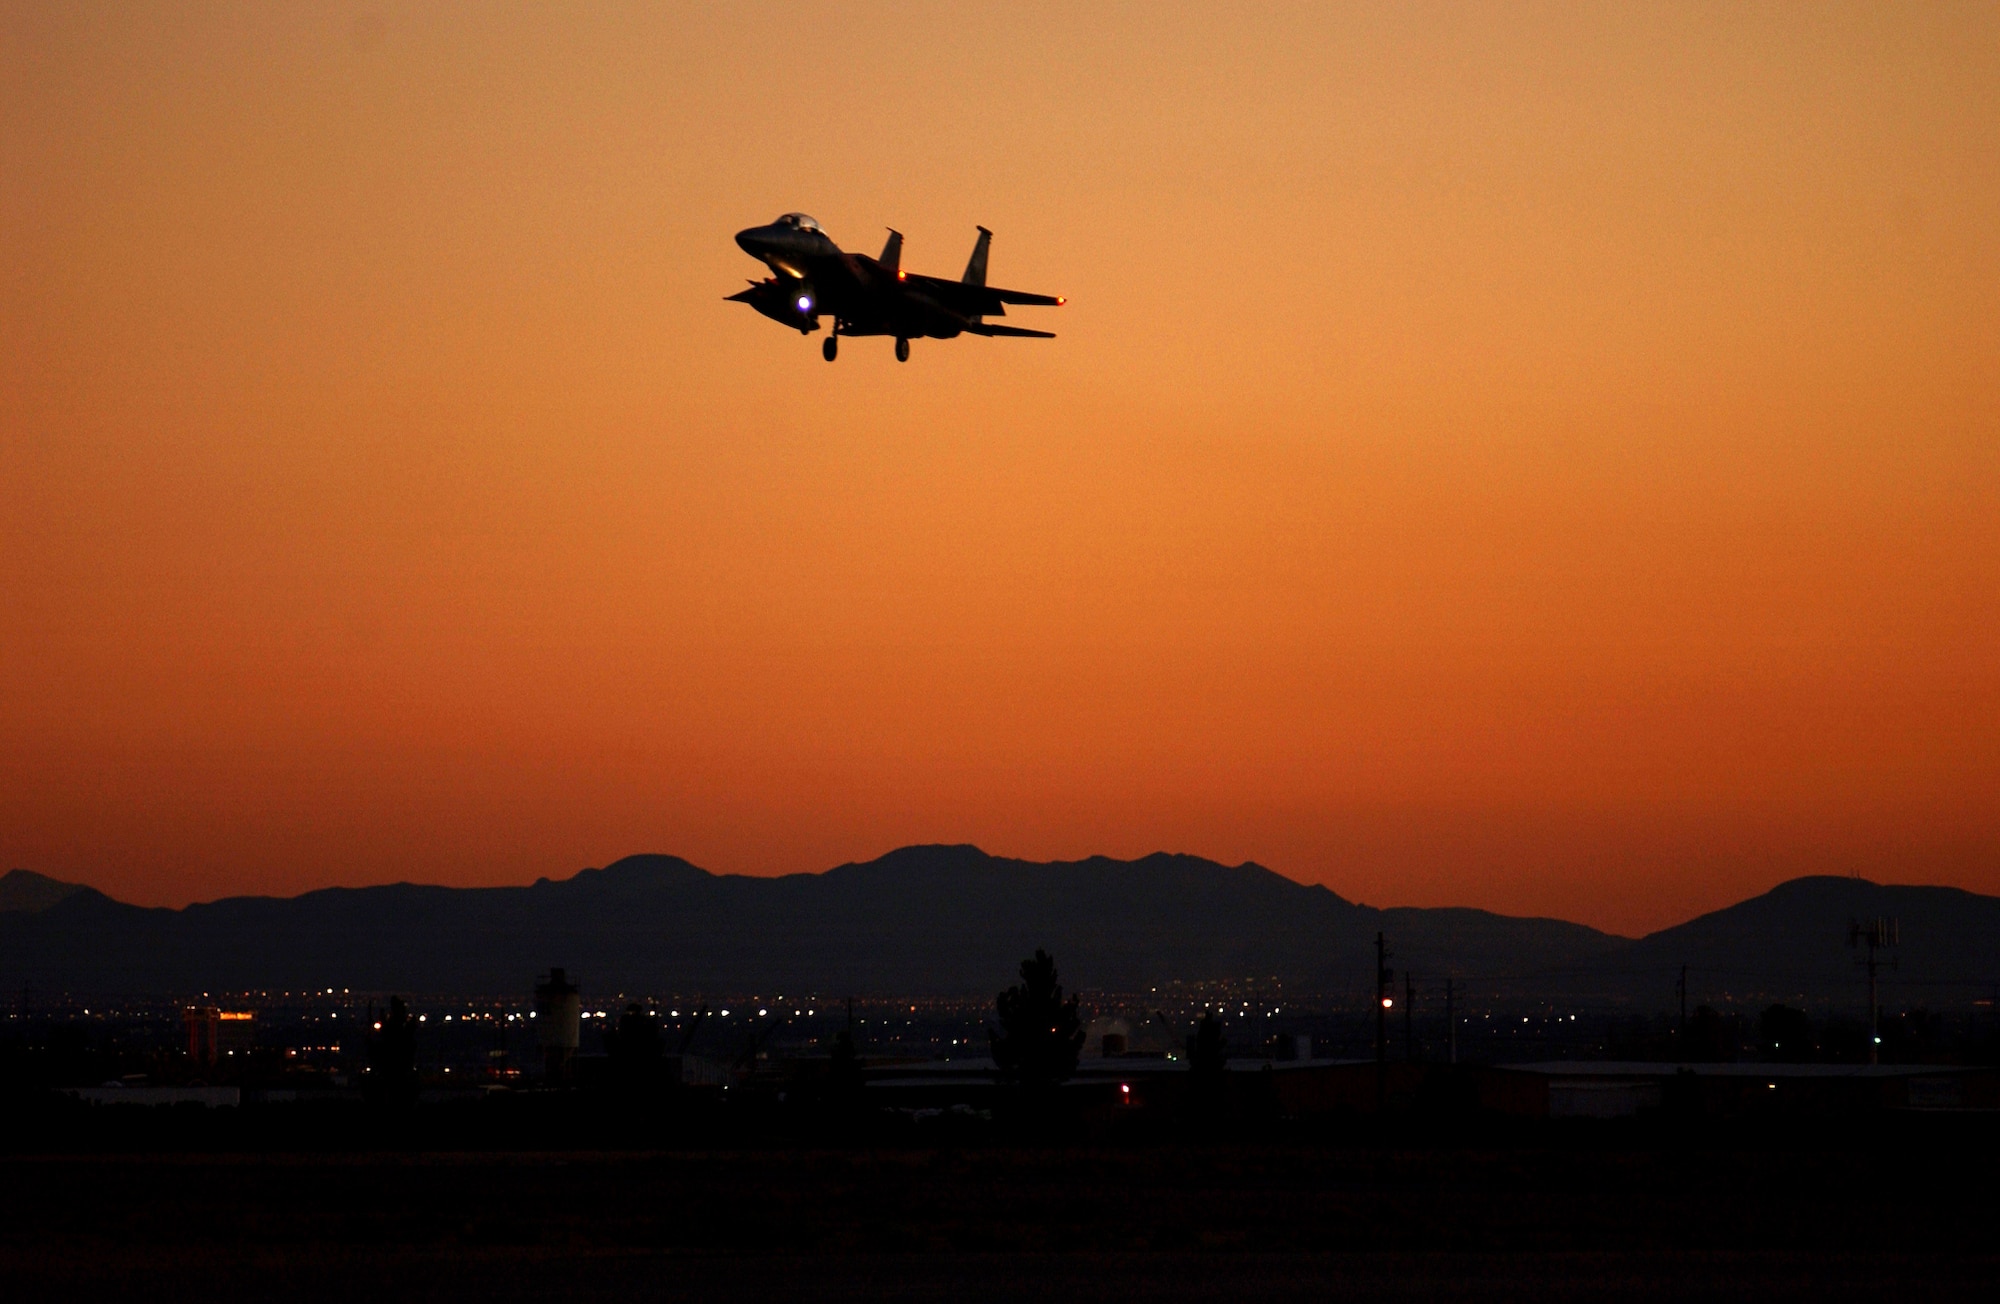 An F-15 participating in Exercise Red Flag 07-1 approaches Nellis Air Force Base, Nev., on Oct. 19, 2006.  Red Flag tests aircrews’ war-fighting skills in realistic combat situations. The aircraft fly missions during the day and night to the nearby Nevada Test and Training Range where they simulate an air war. U.S. service members, with representatives from each branch of service along with coalition forces, participate in Red Flag.  (U.S. Air Force photo/Airman First Class Brian Ybarbo)

